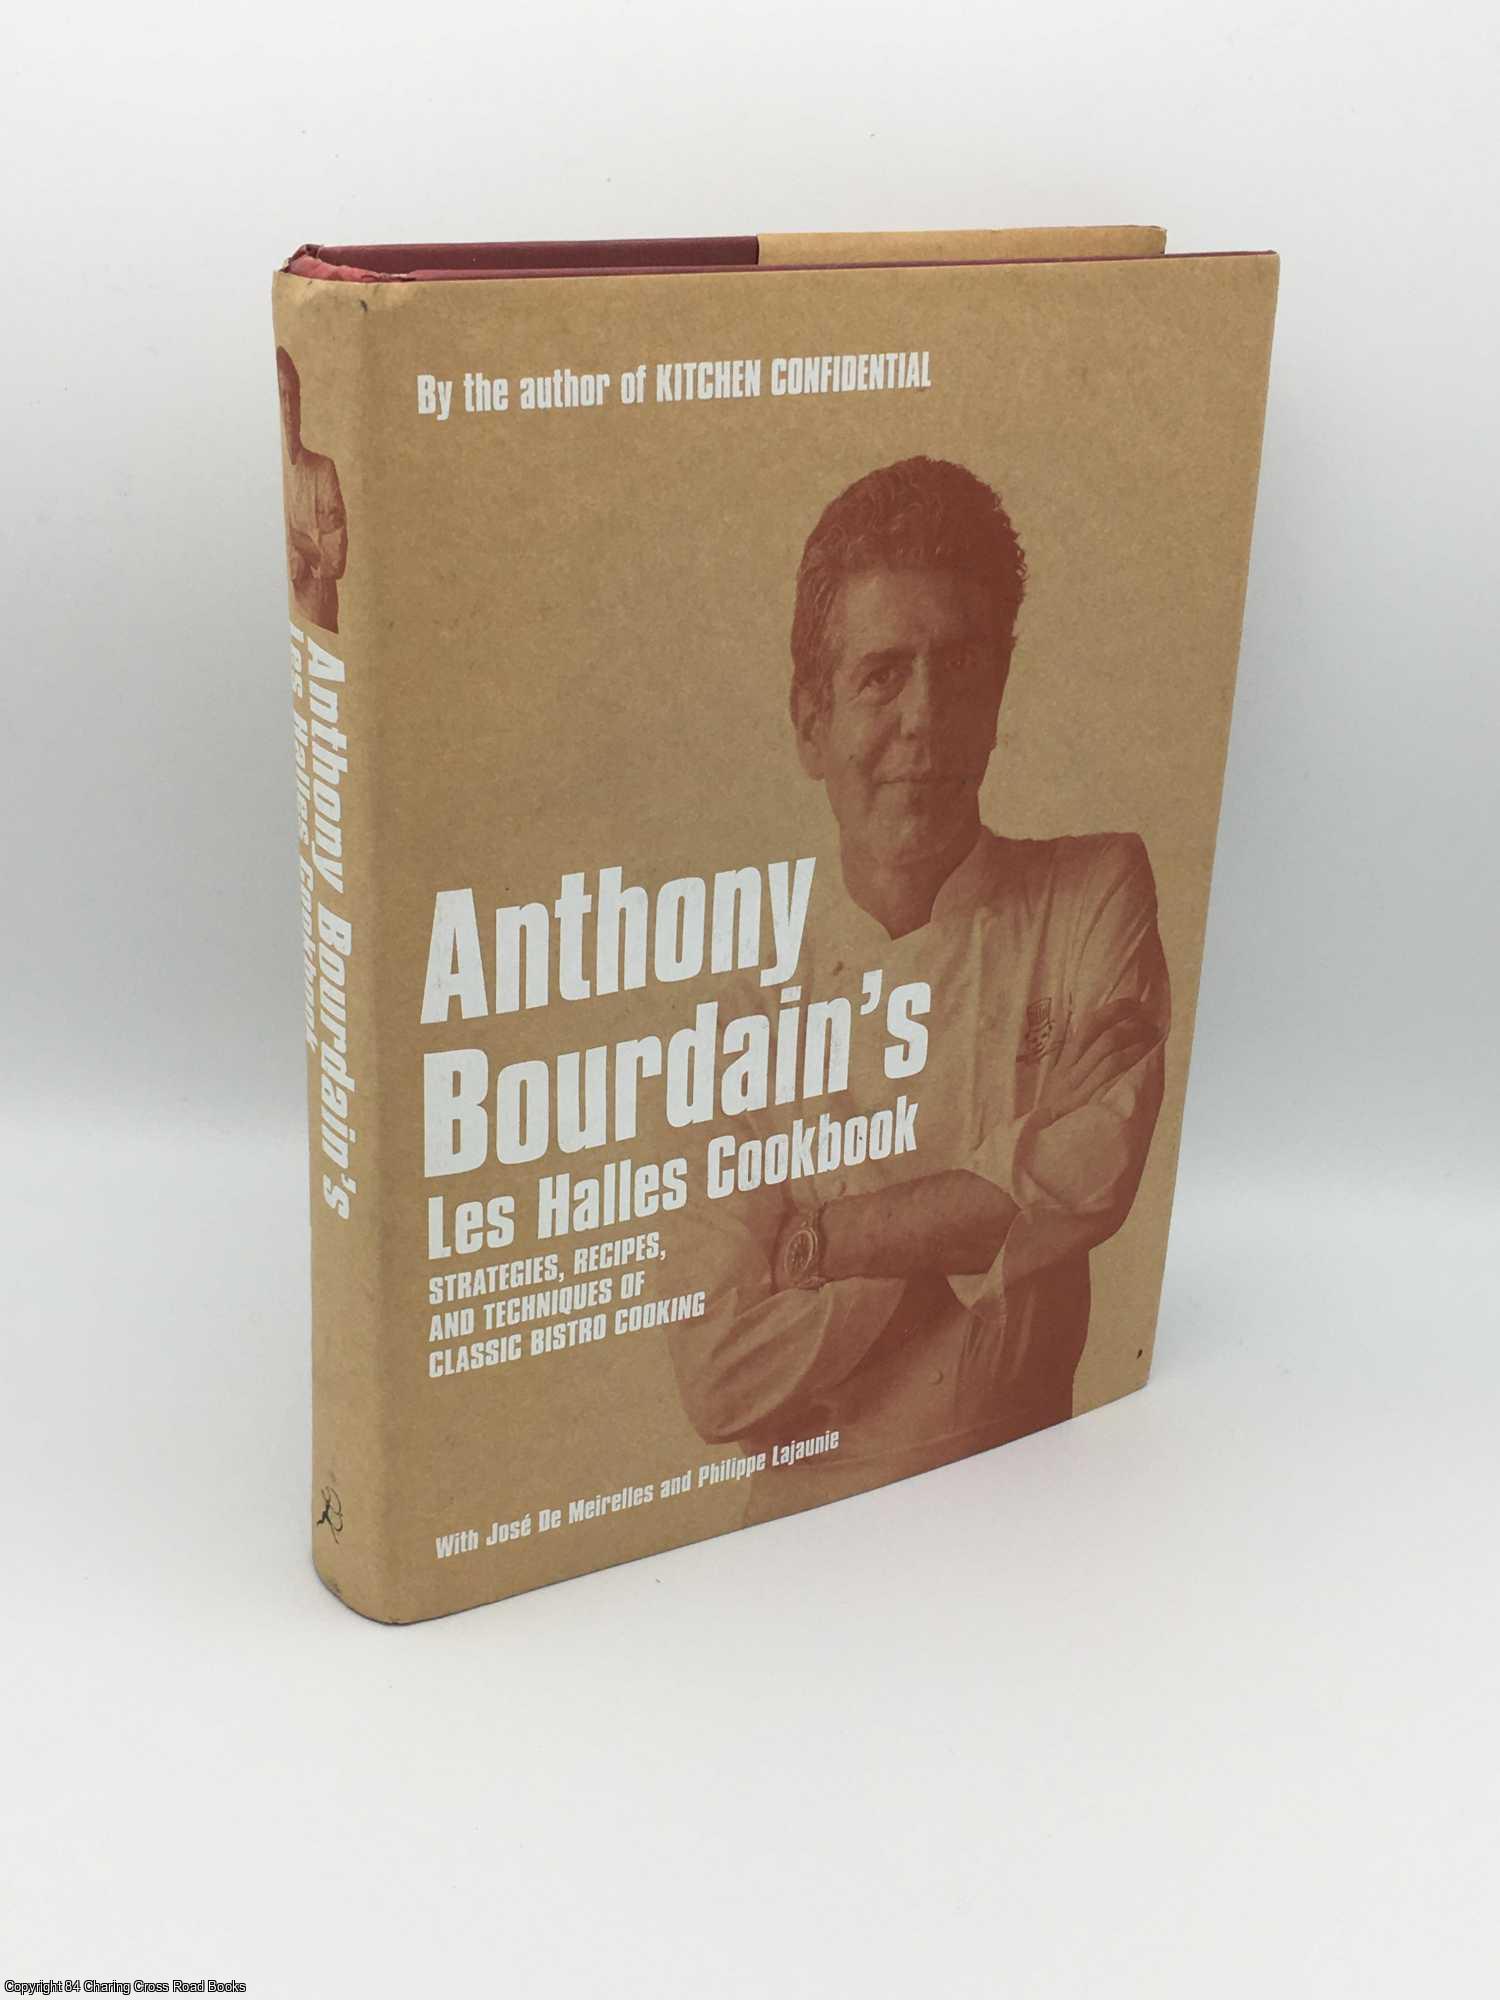 Bourdain, Anthony - Anthony Bourdain's Les Halles Cookbook: Strategies, Recipes, and Techniques of Classic Bistro Cooking